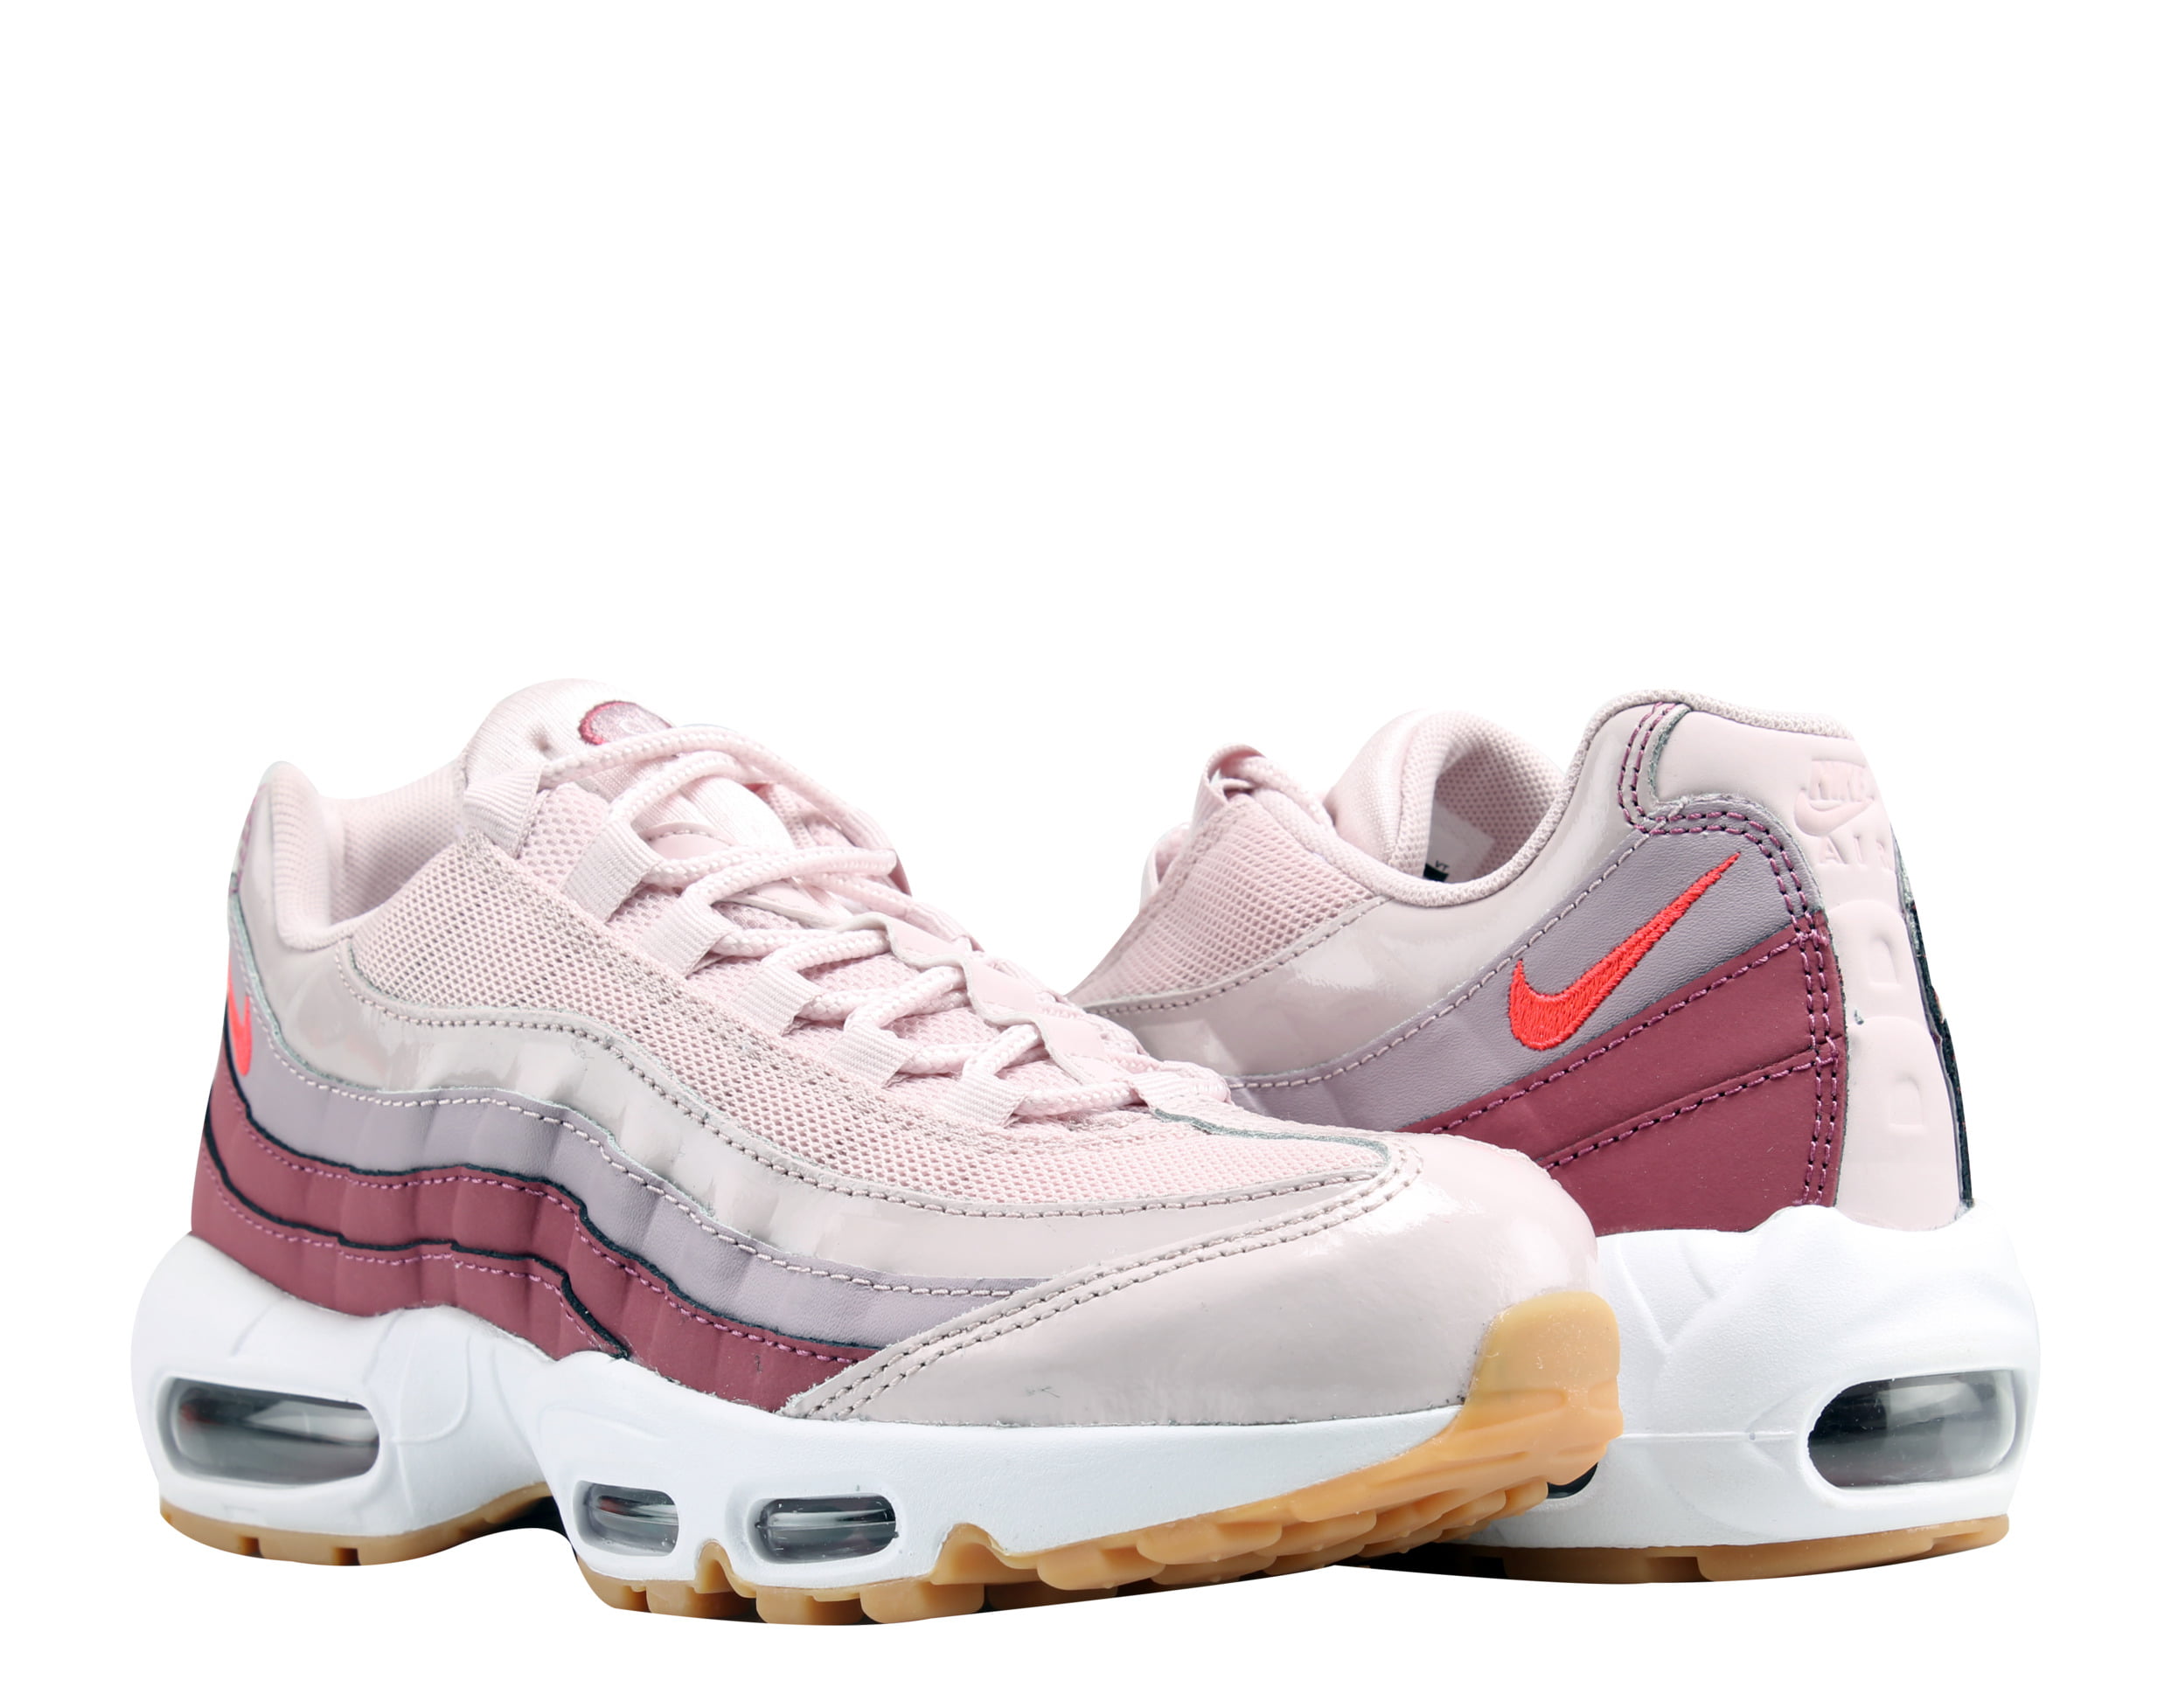 Nike - Nike Air Max 95 Barely Rose/Hot Punch Women's Running Shoes ...